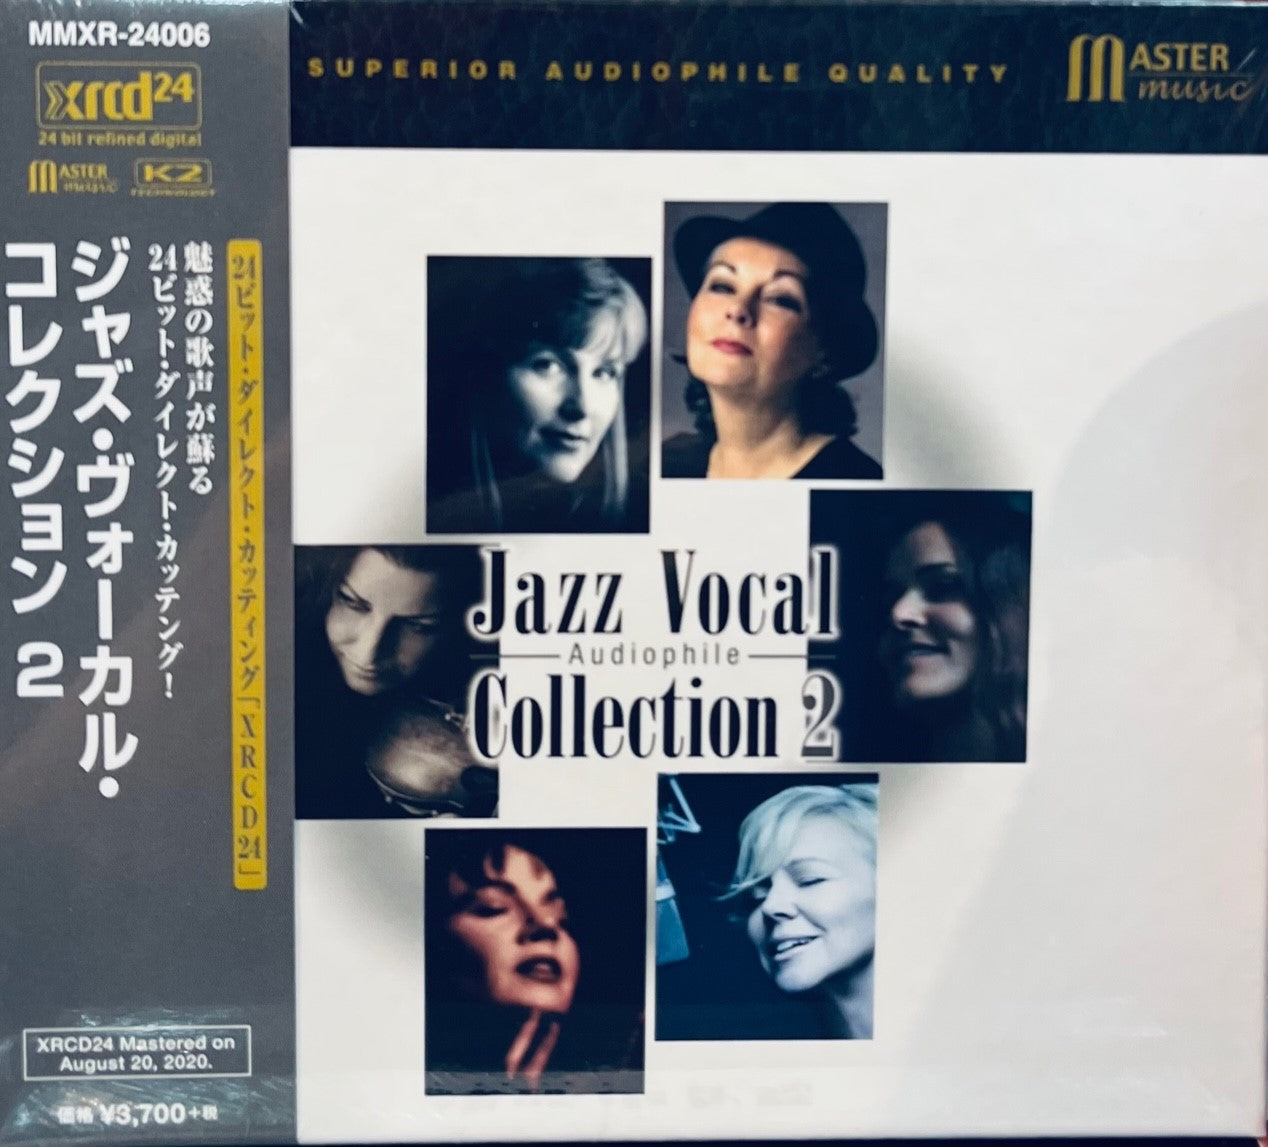 JAZZ VOCAL AUDIOPHILLE COLLECTION VOL 2 - (XRCD24) CD MADE IN JAPAN